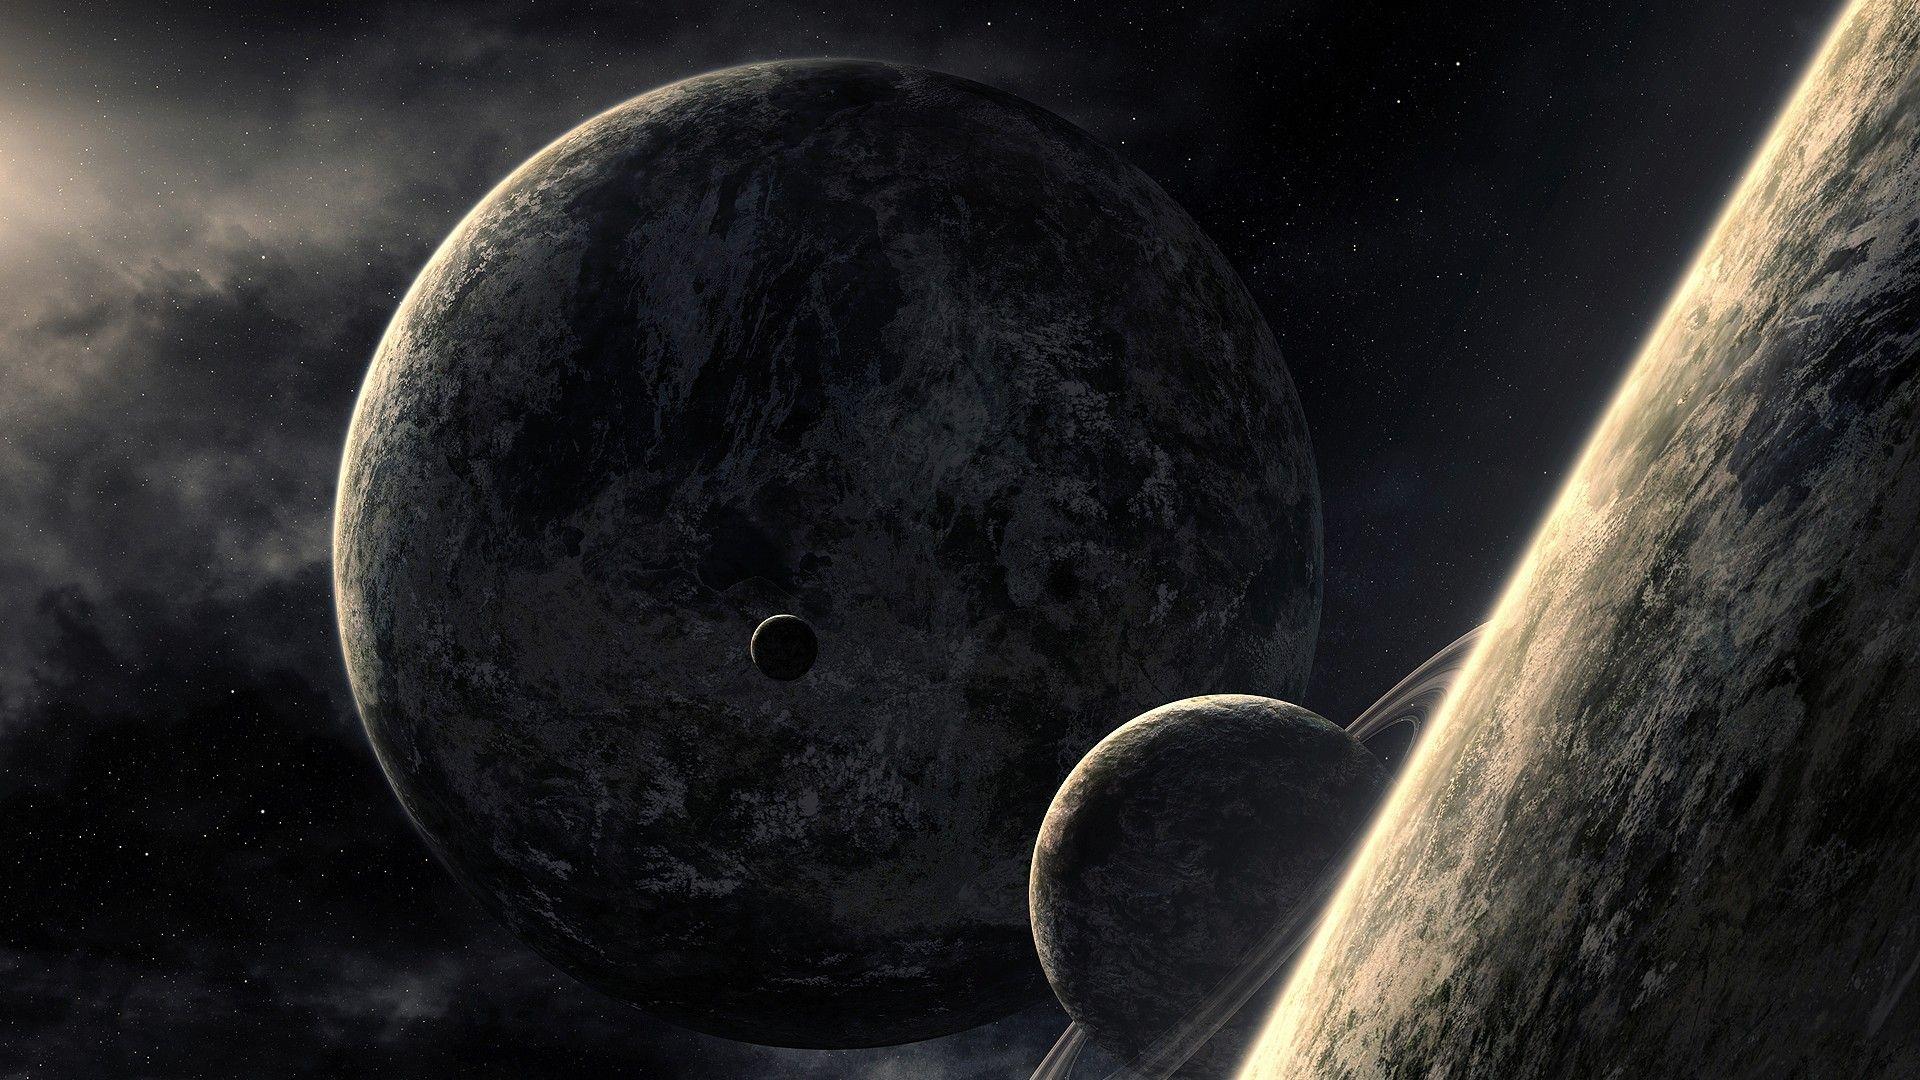 Download Planets Cosmos Wallpaper 1920x1080